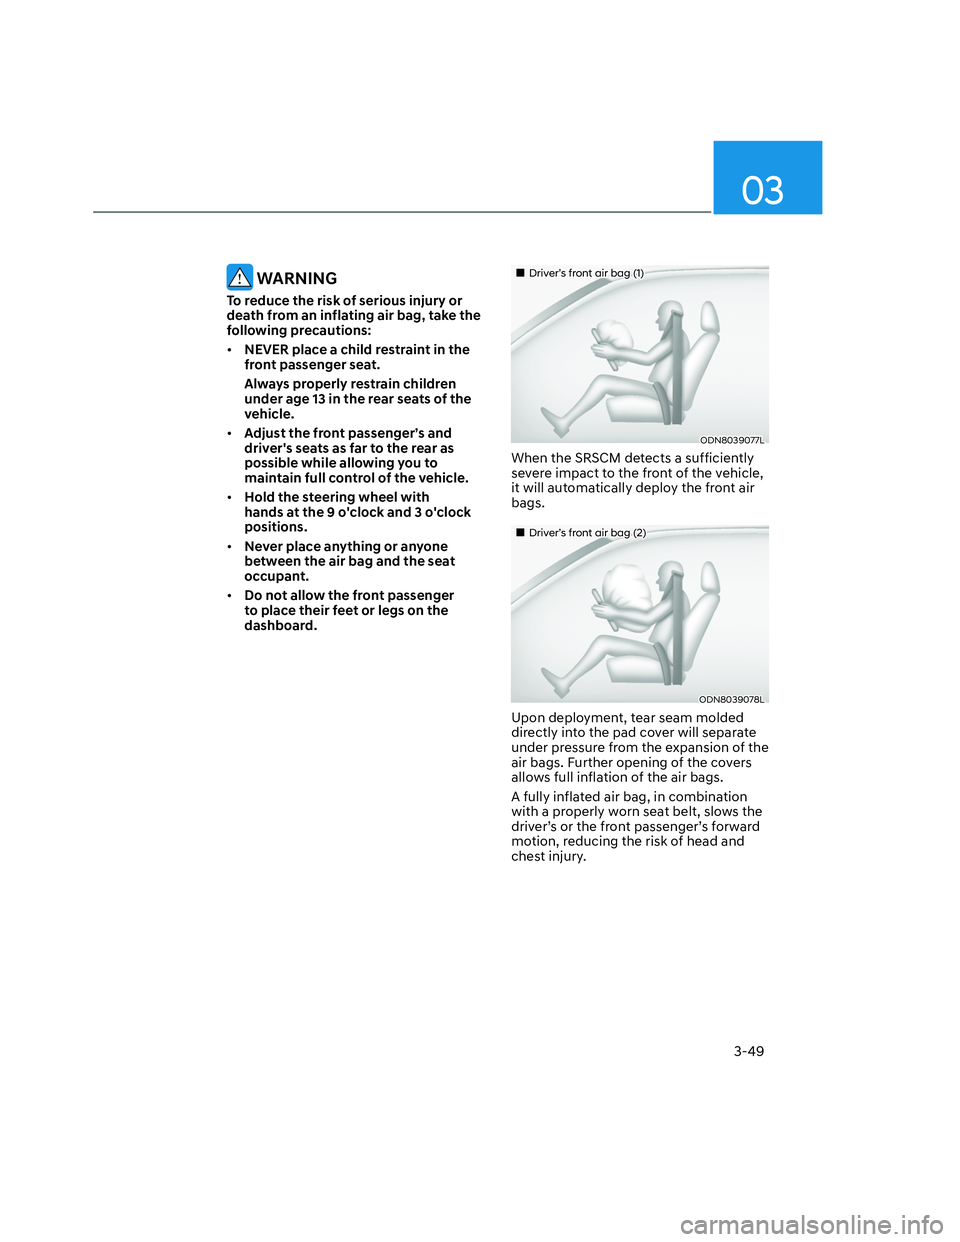 HYUNDAI SANTA CRUZ 2022  Owners Manual 03
3-49
 WARNING
To reduce the risk of serious injury or 
death from an inflating air bag, take the 
following precautions:
• NEVER place a child restraint in the 
front passenger seat.
Always prope